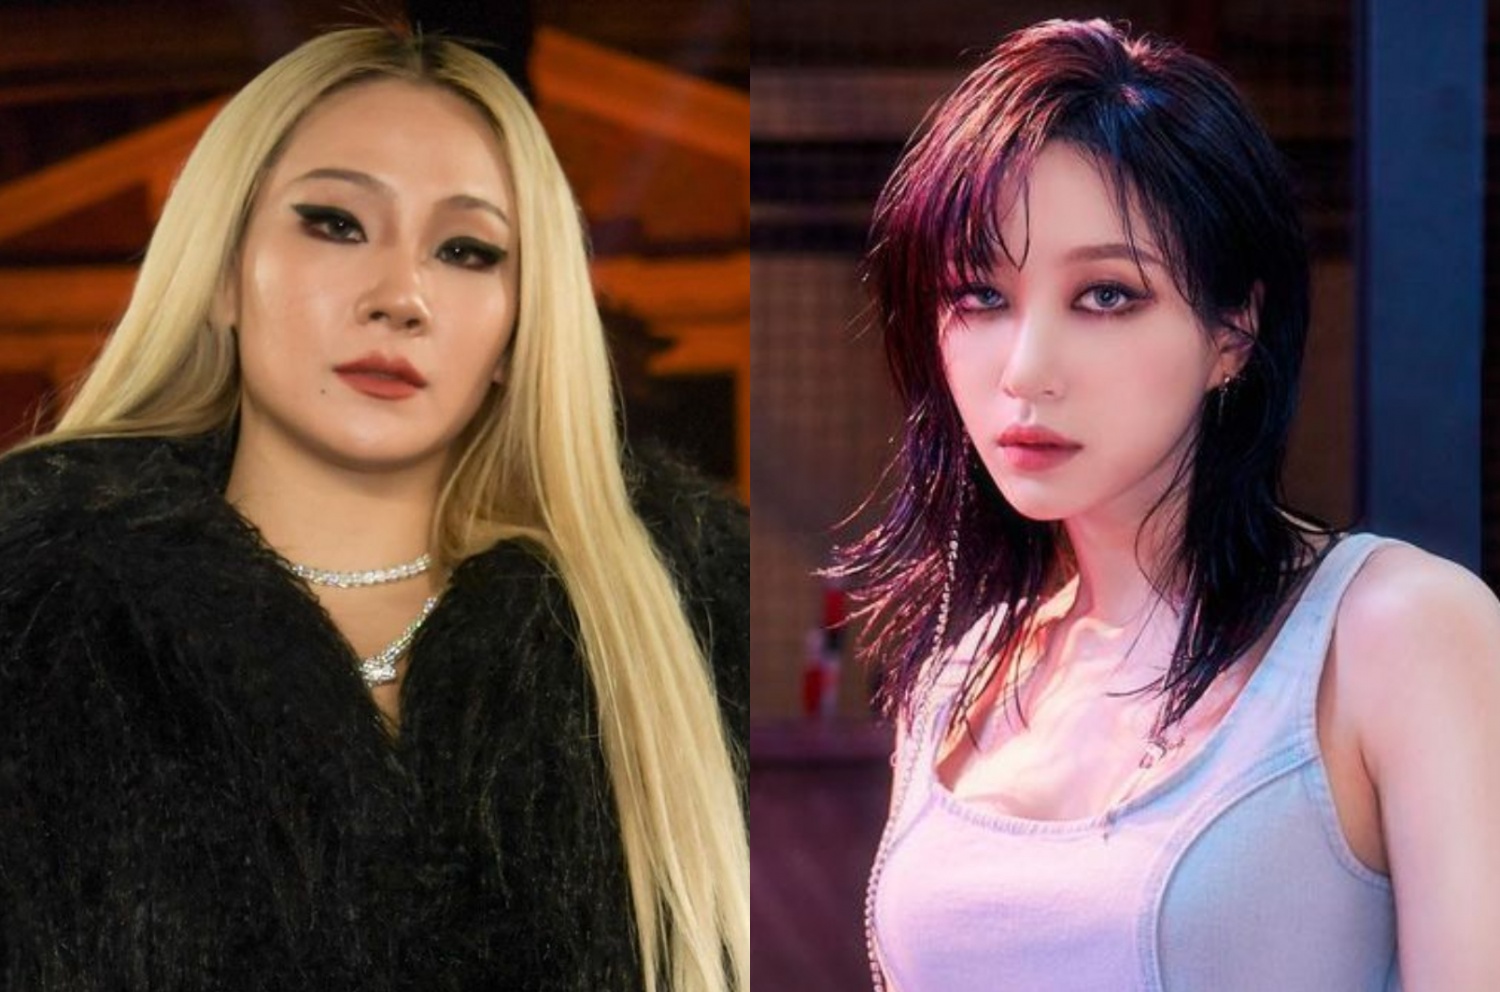 5 K-pop idols who considered or were asked to undergo plastic surgery but chose not to do so